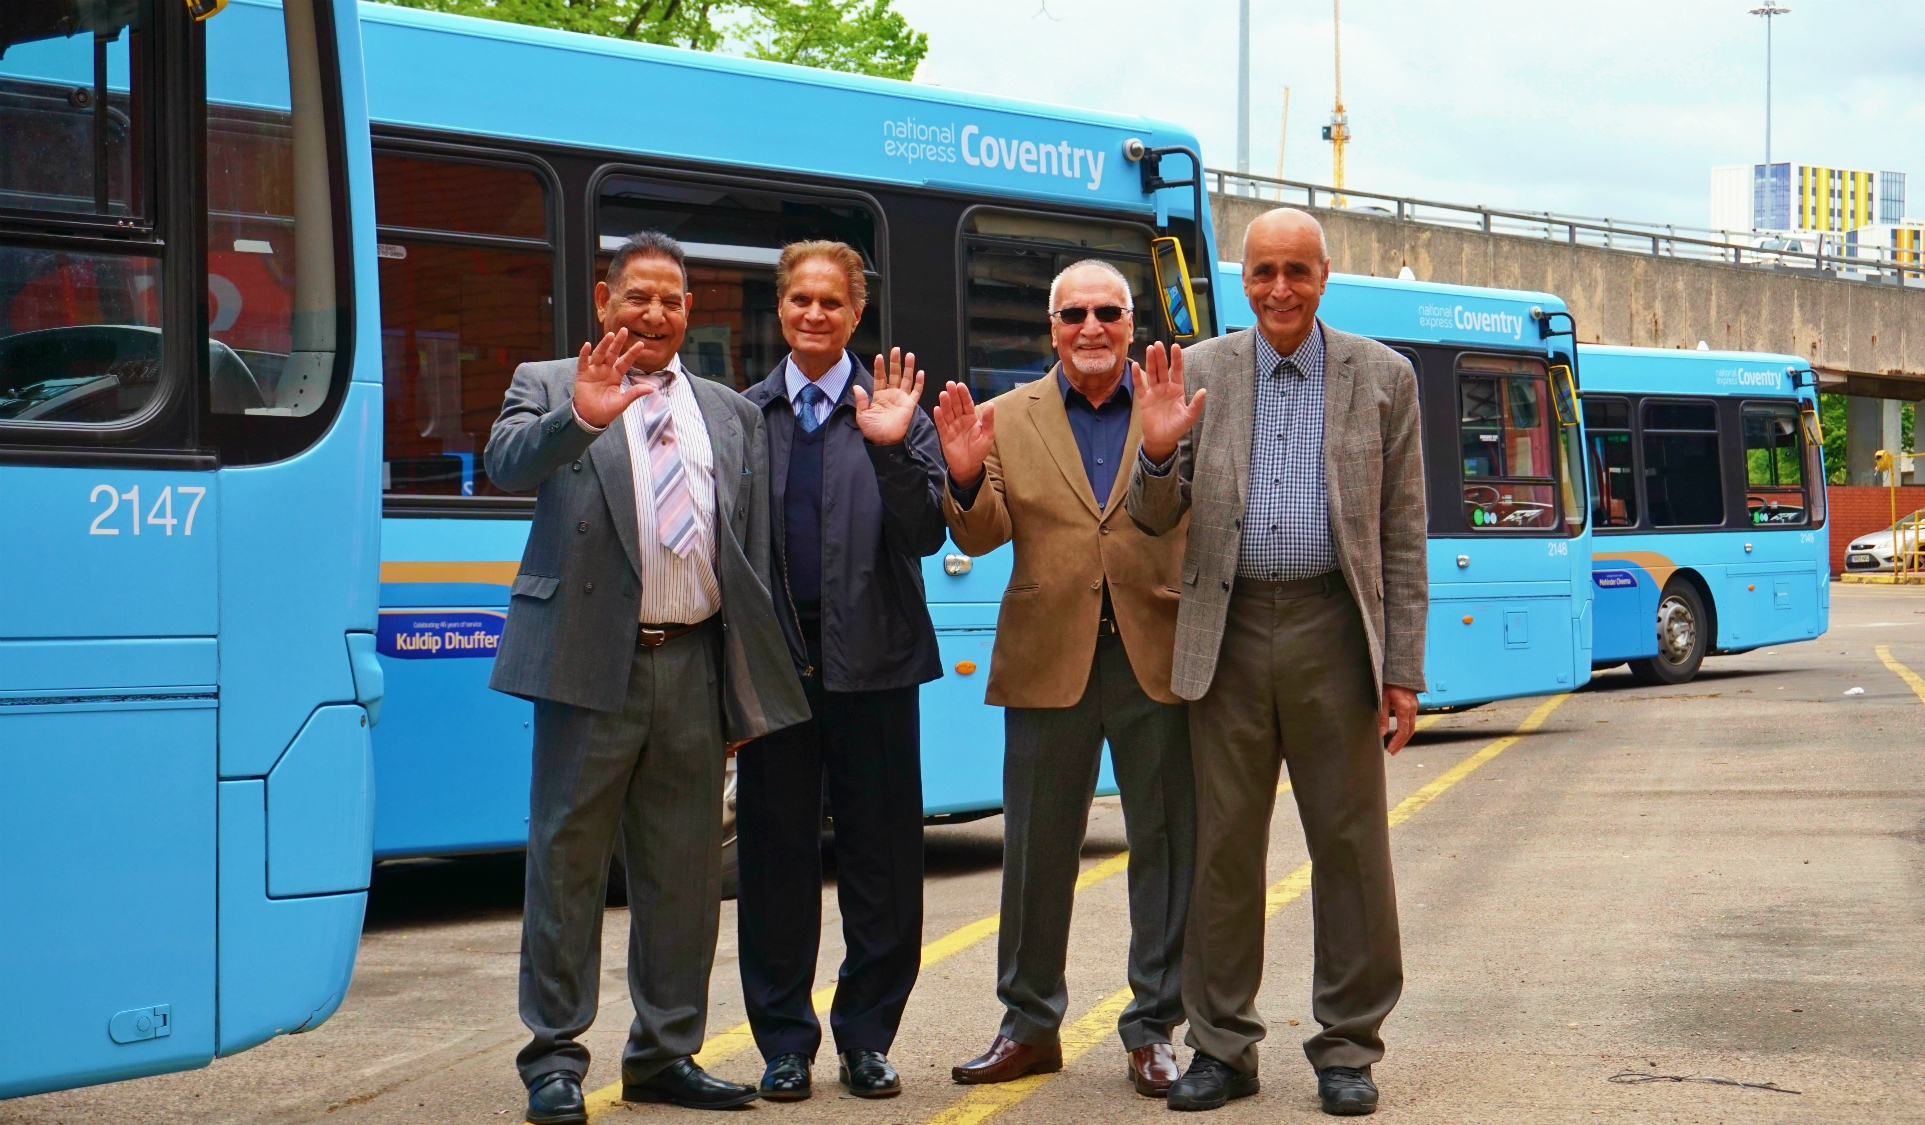 National Express Coventry thanks drivers for incredible 200 years’ service